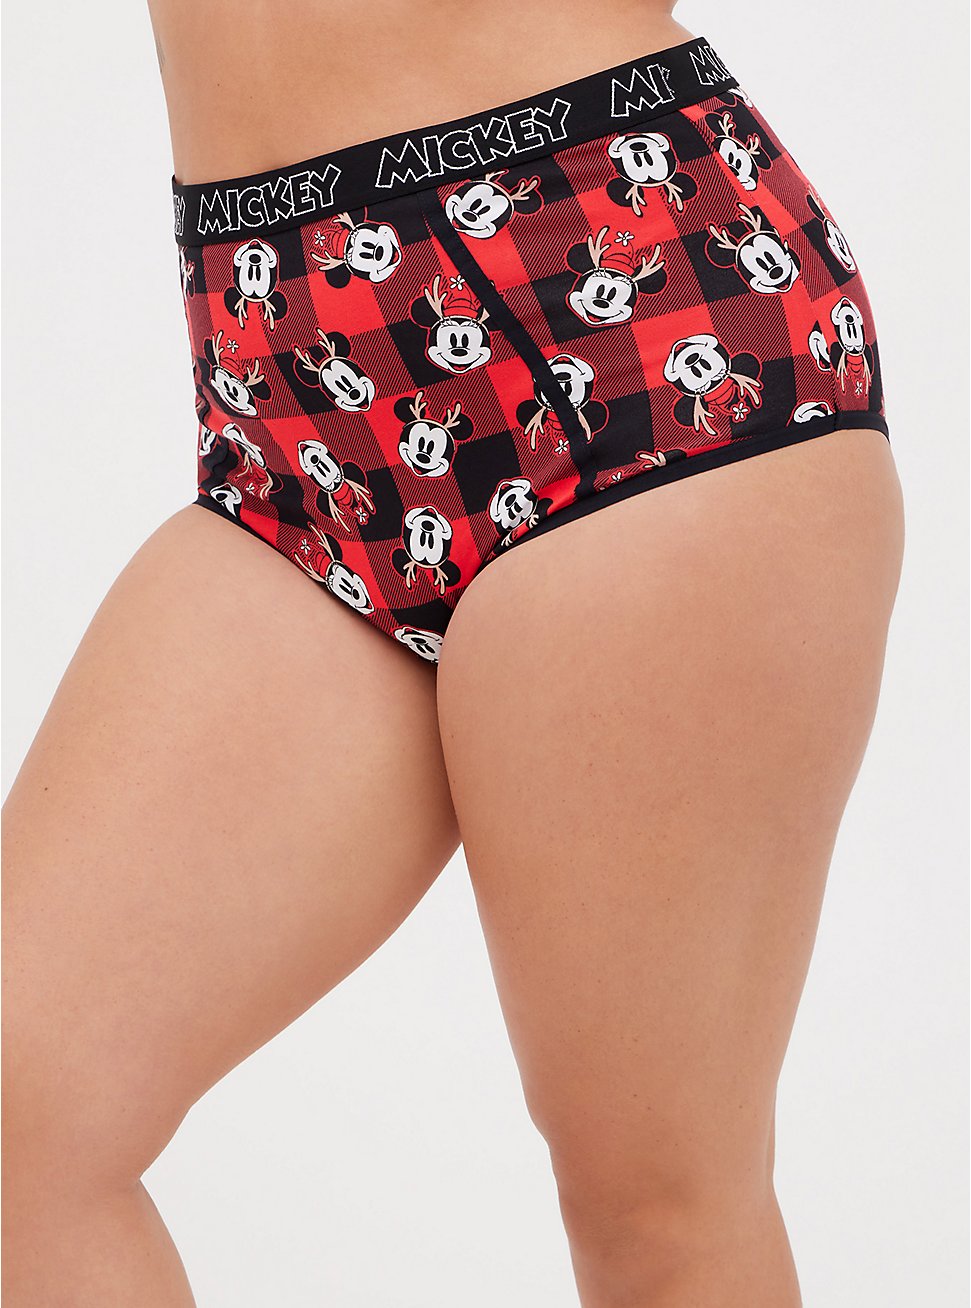 Disney High Waist Cheeky Panty - Cotton Mickey Mouse Plaid Red, MULTI, hi-res